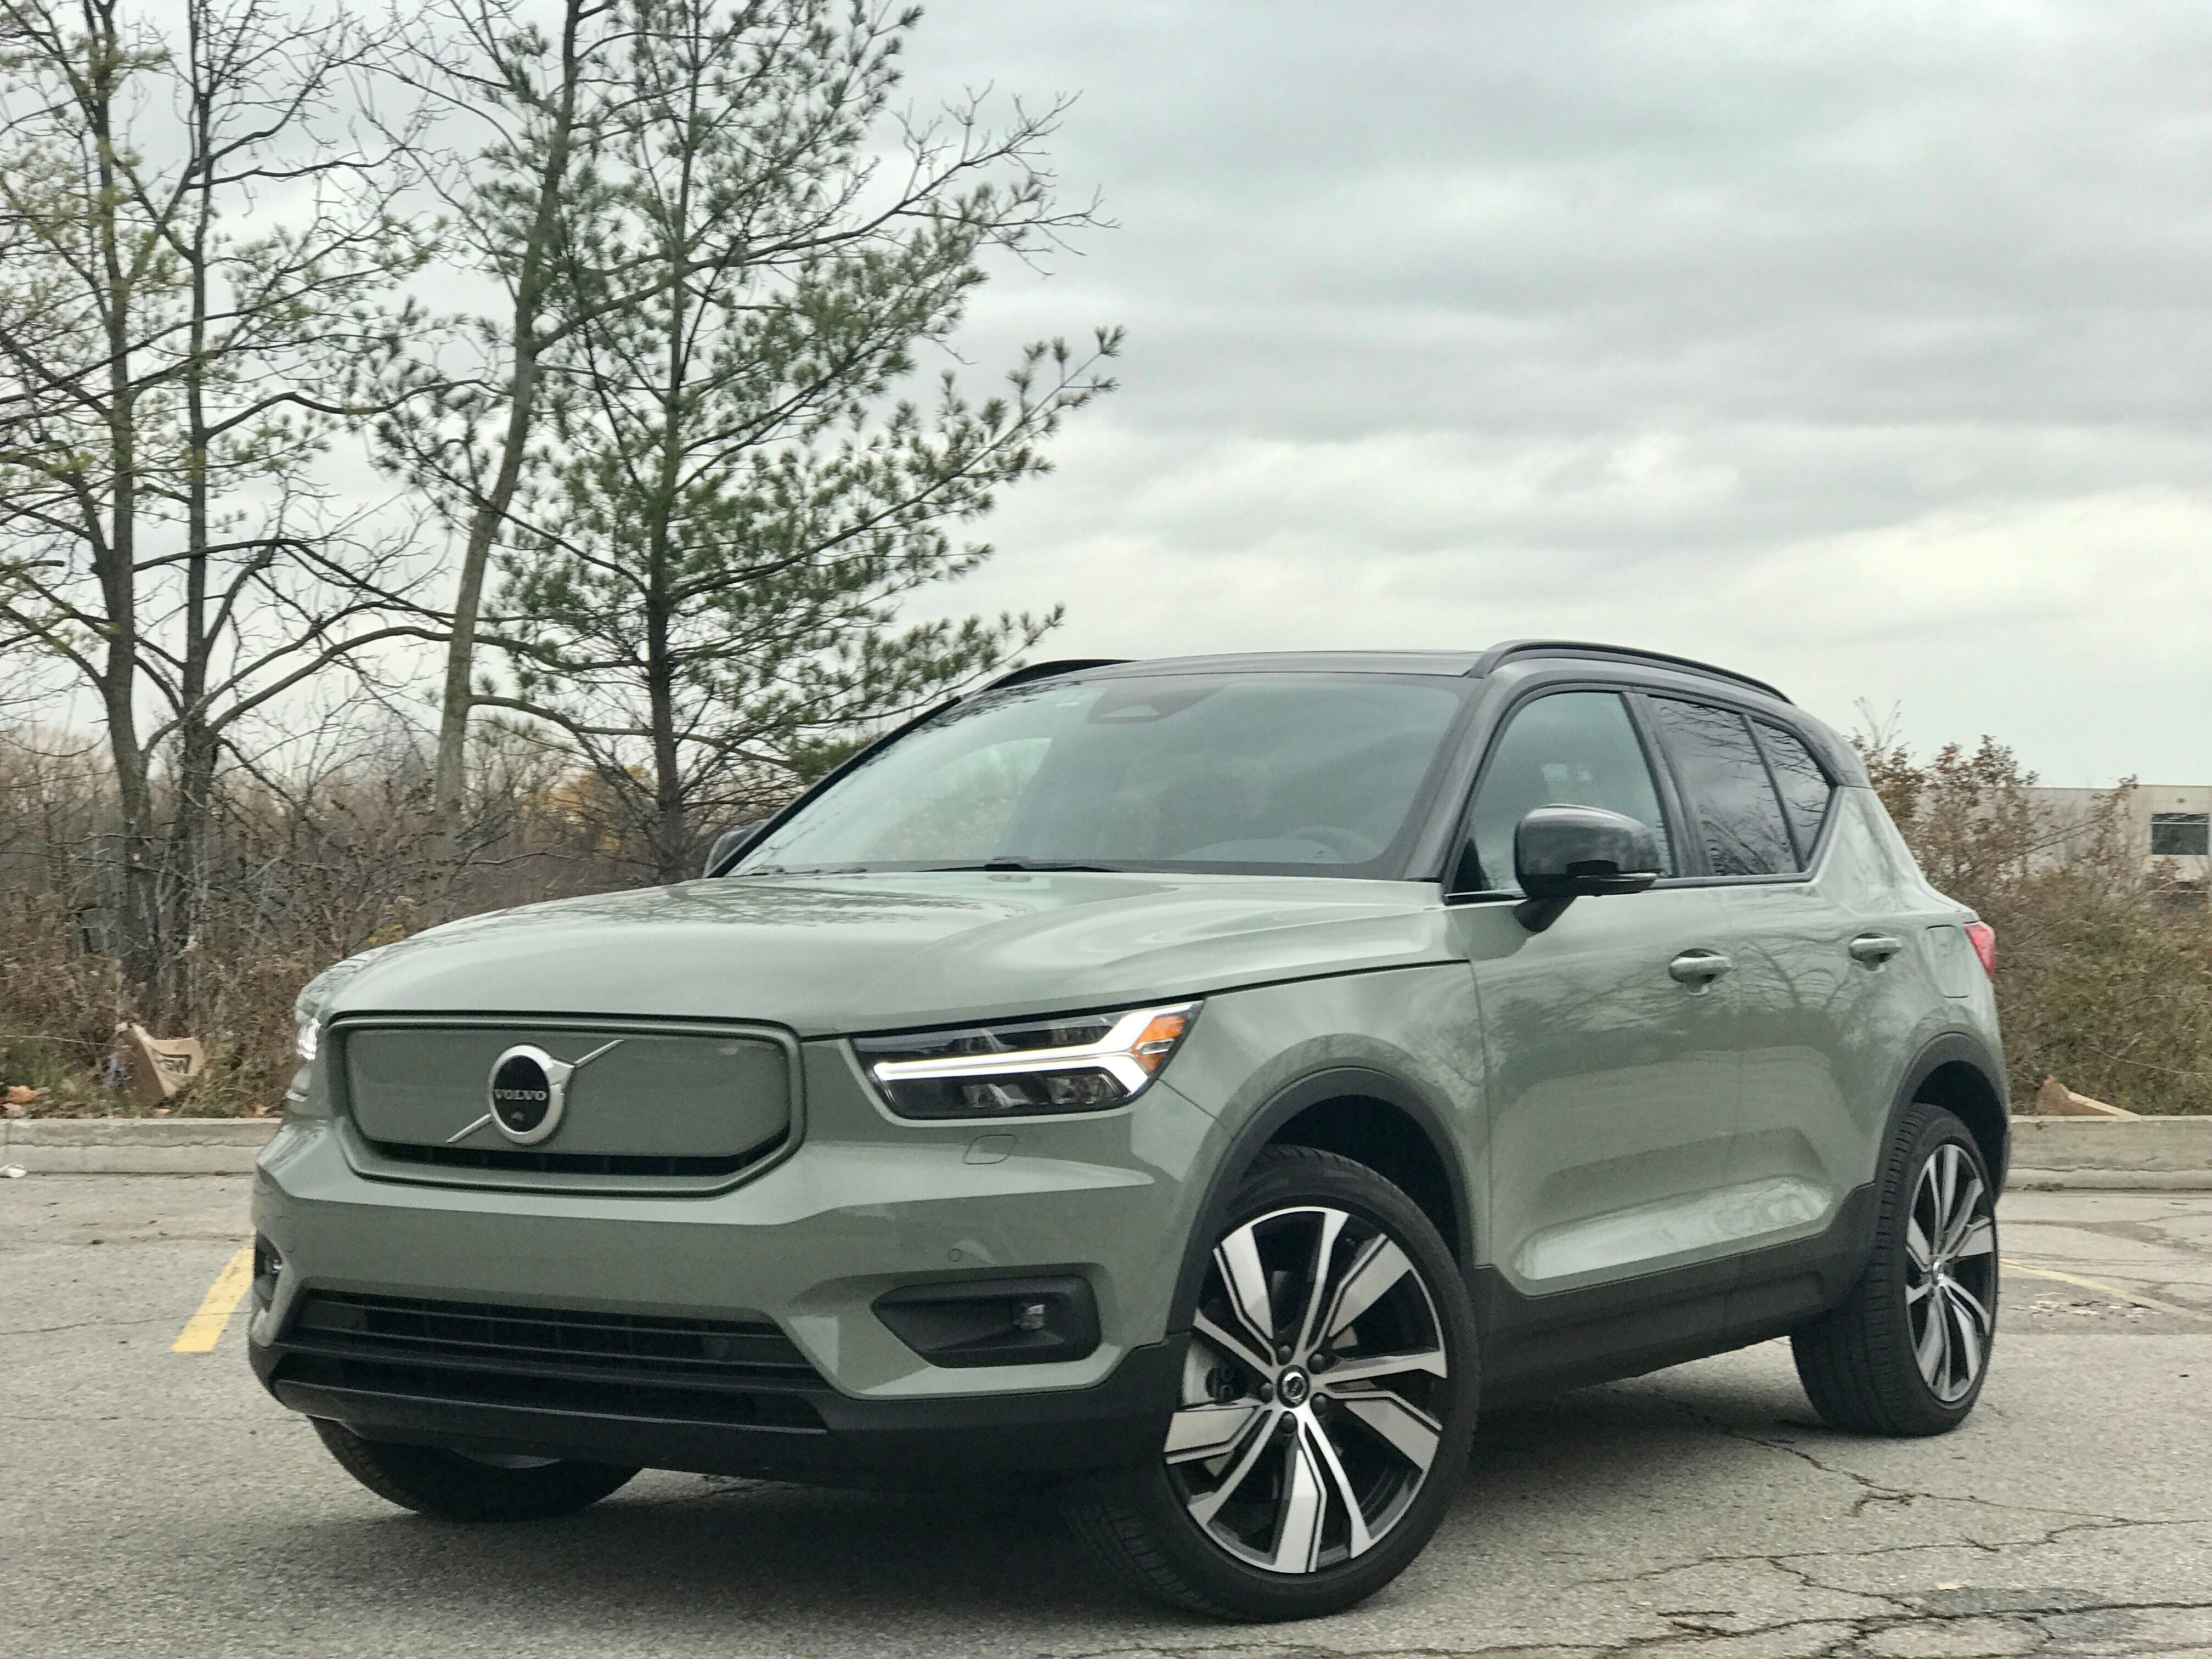 A Look At The 2021 Volvo Xc40 Recharge Suv The Brand S First Electric Vehicle The Globe And Mail